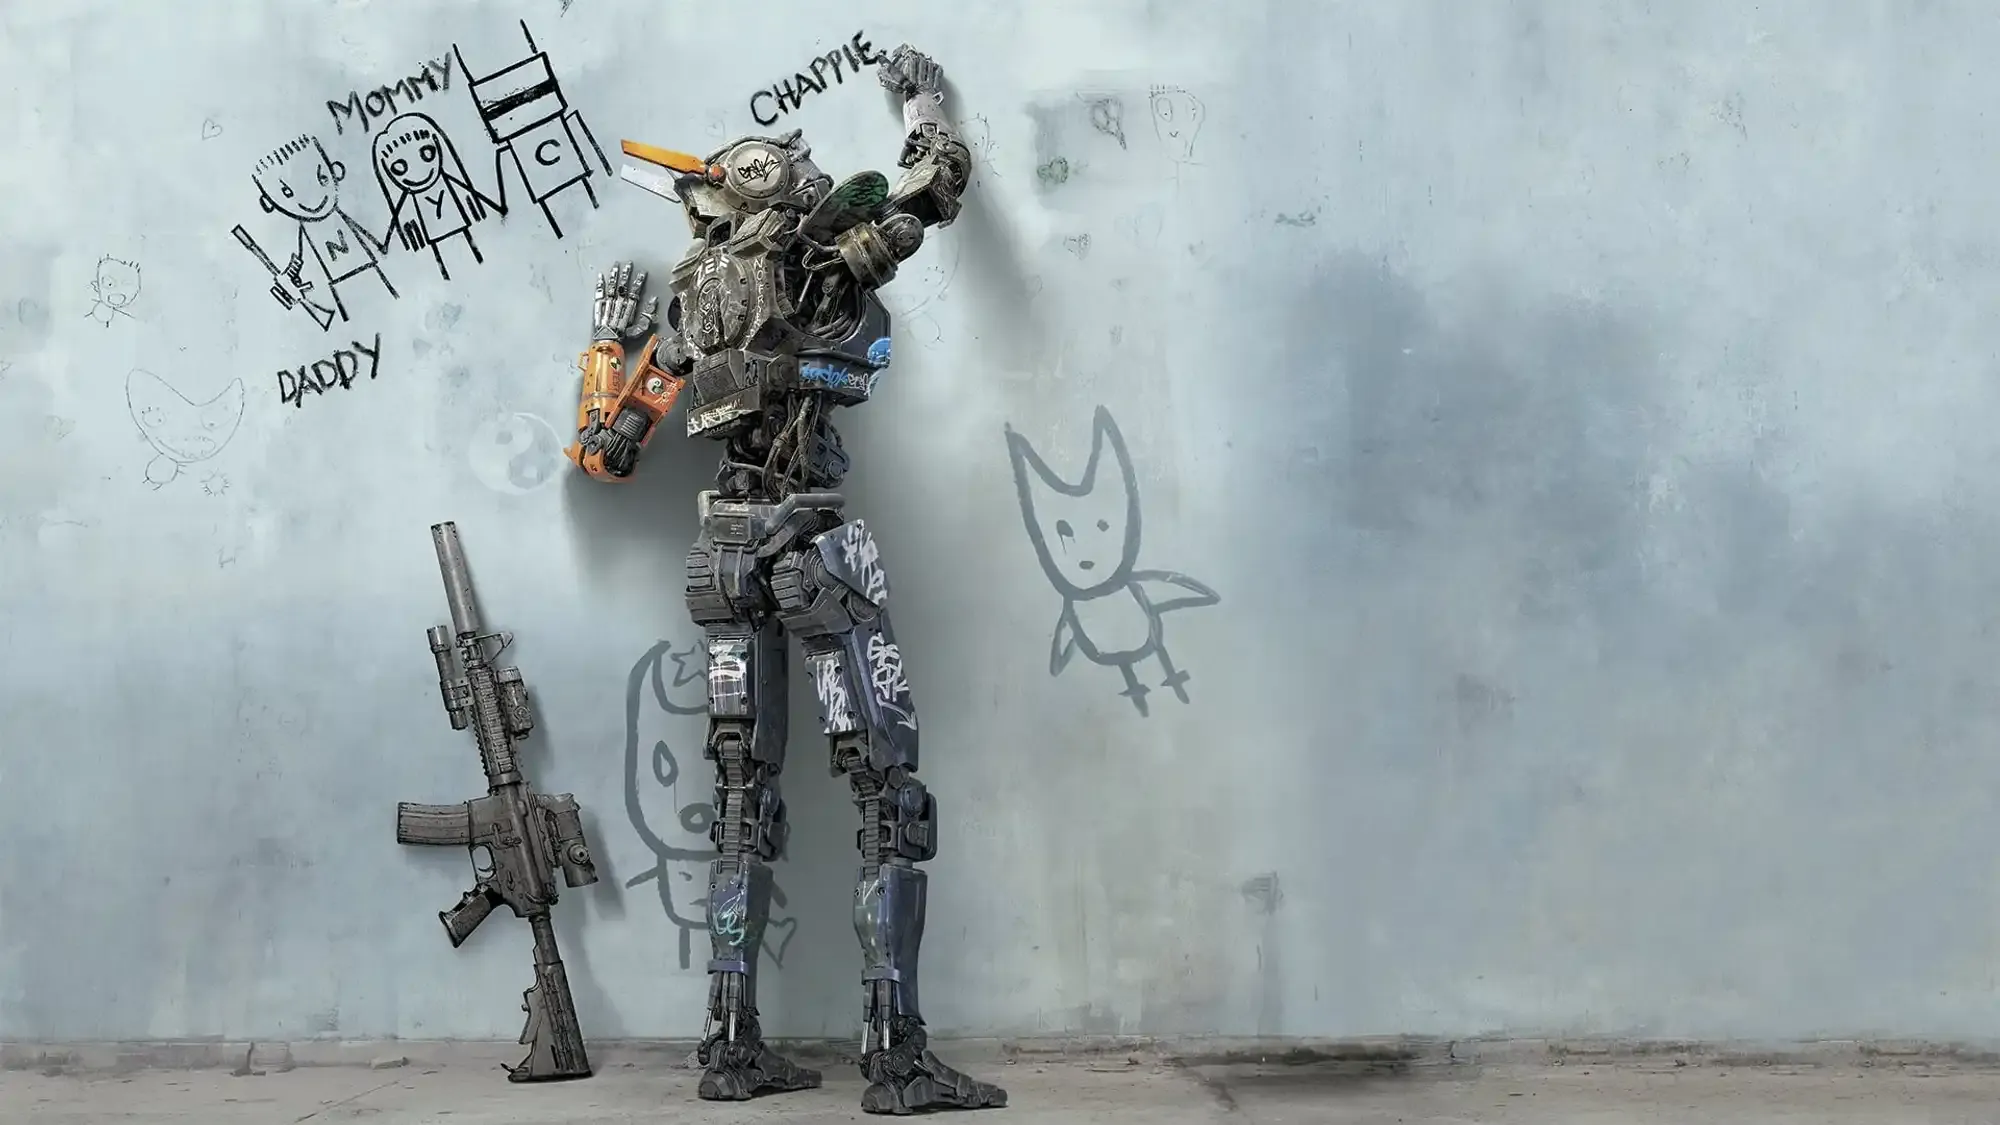 Chappie movie review